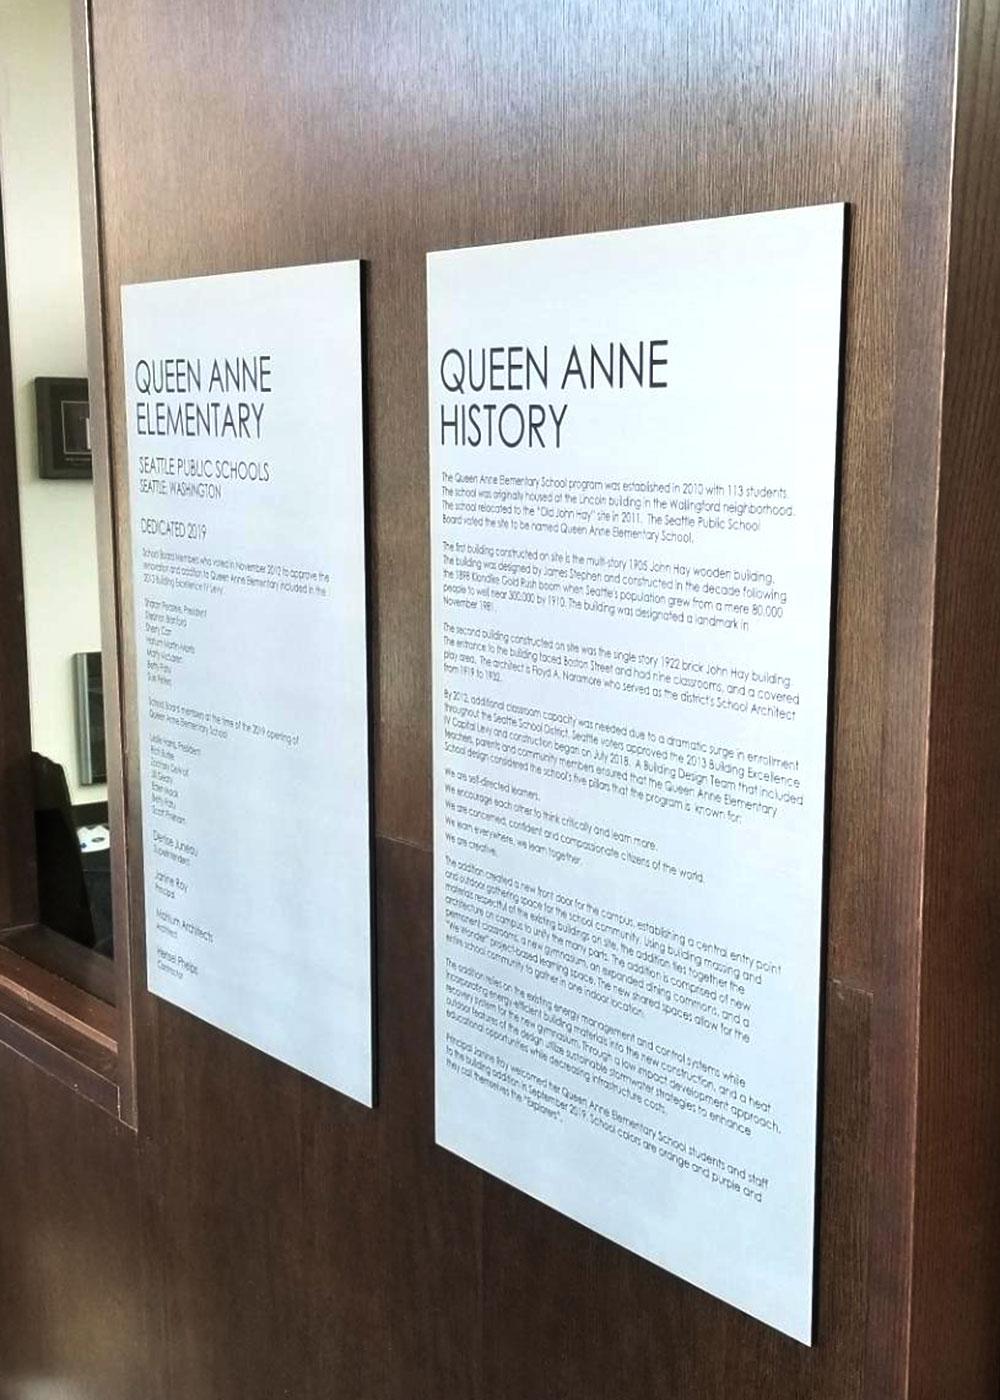 Stainless steel plaques were fabricated to celebrate the rich history of Queen Anne Elementary School.